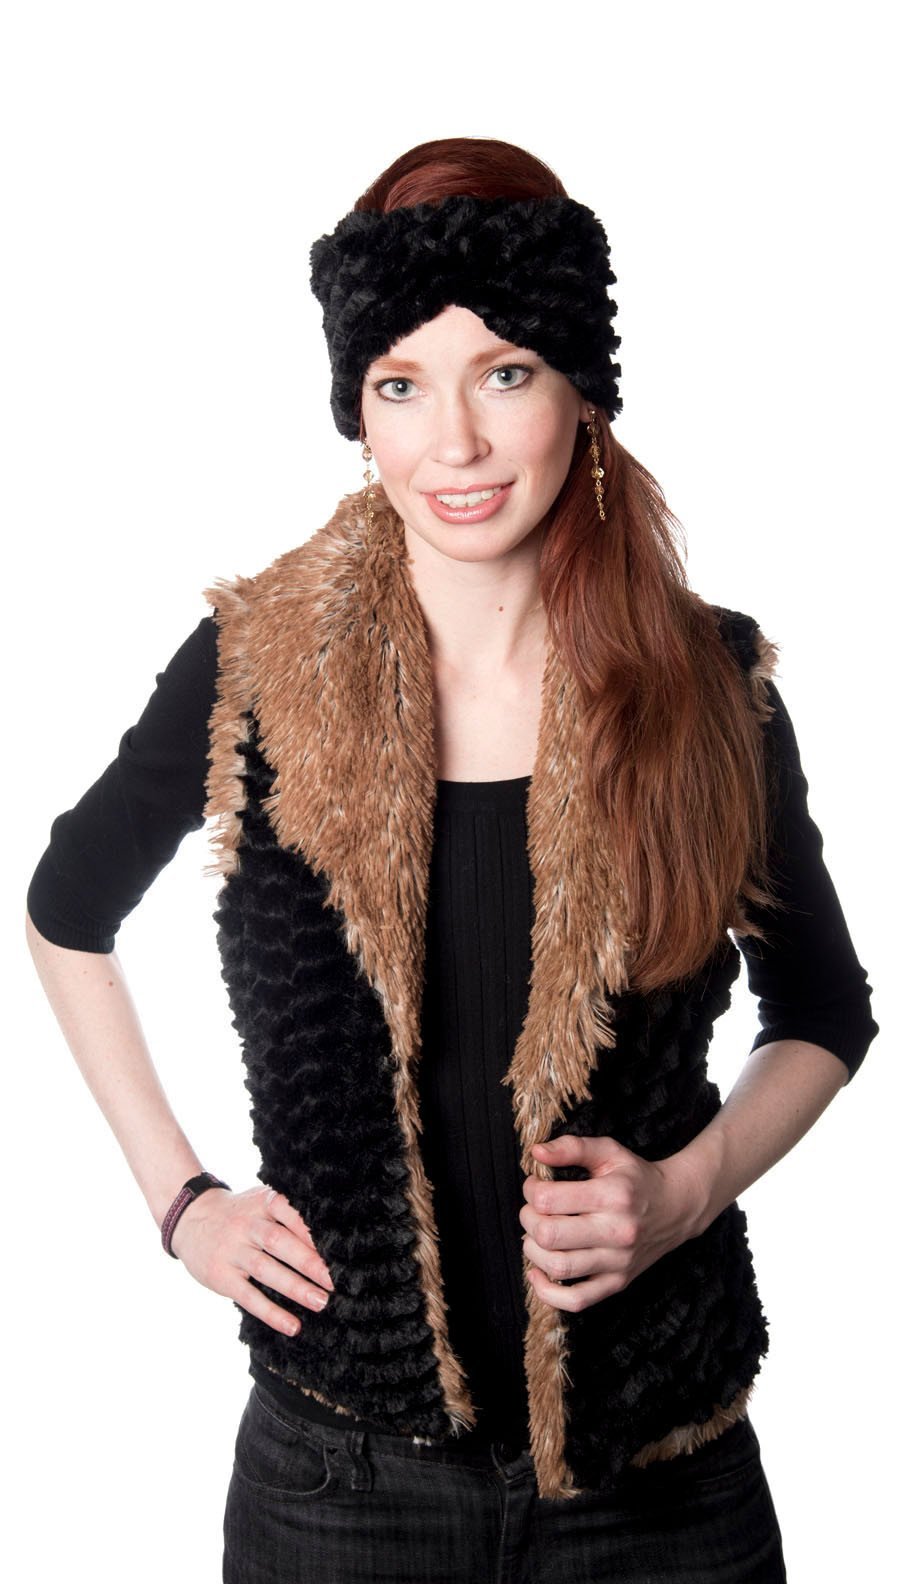 Shawl Collar Vest - Desert Sand in Midnight Faux Fur with Red Fox